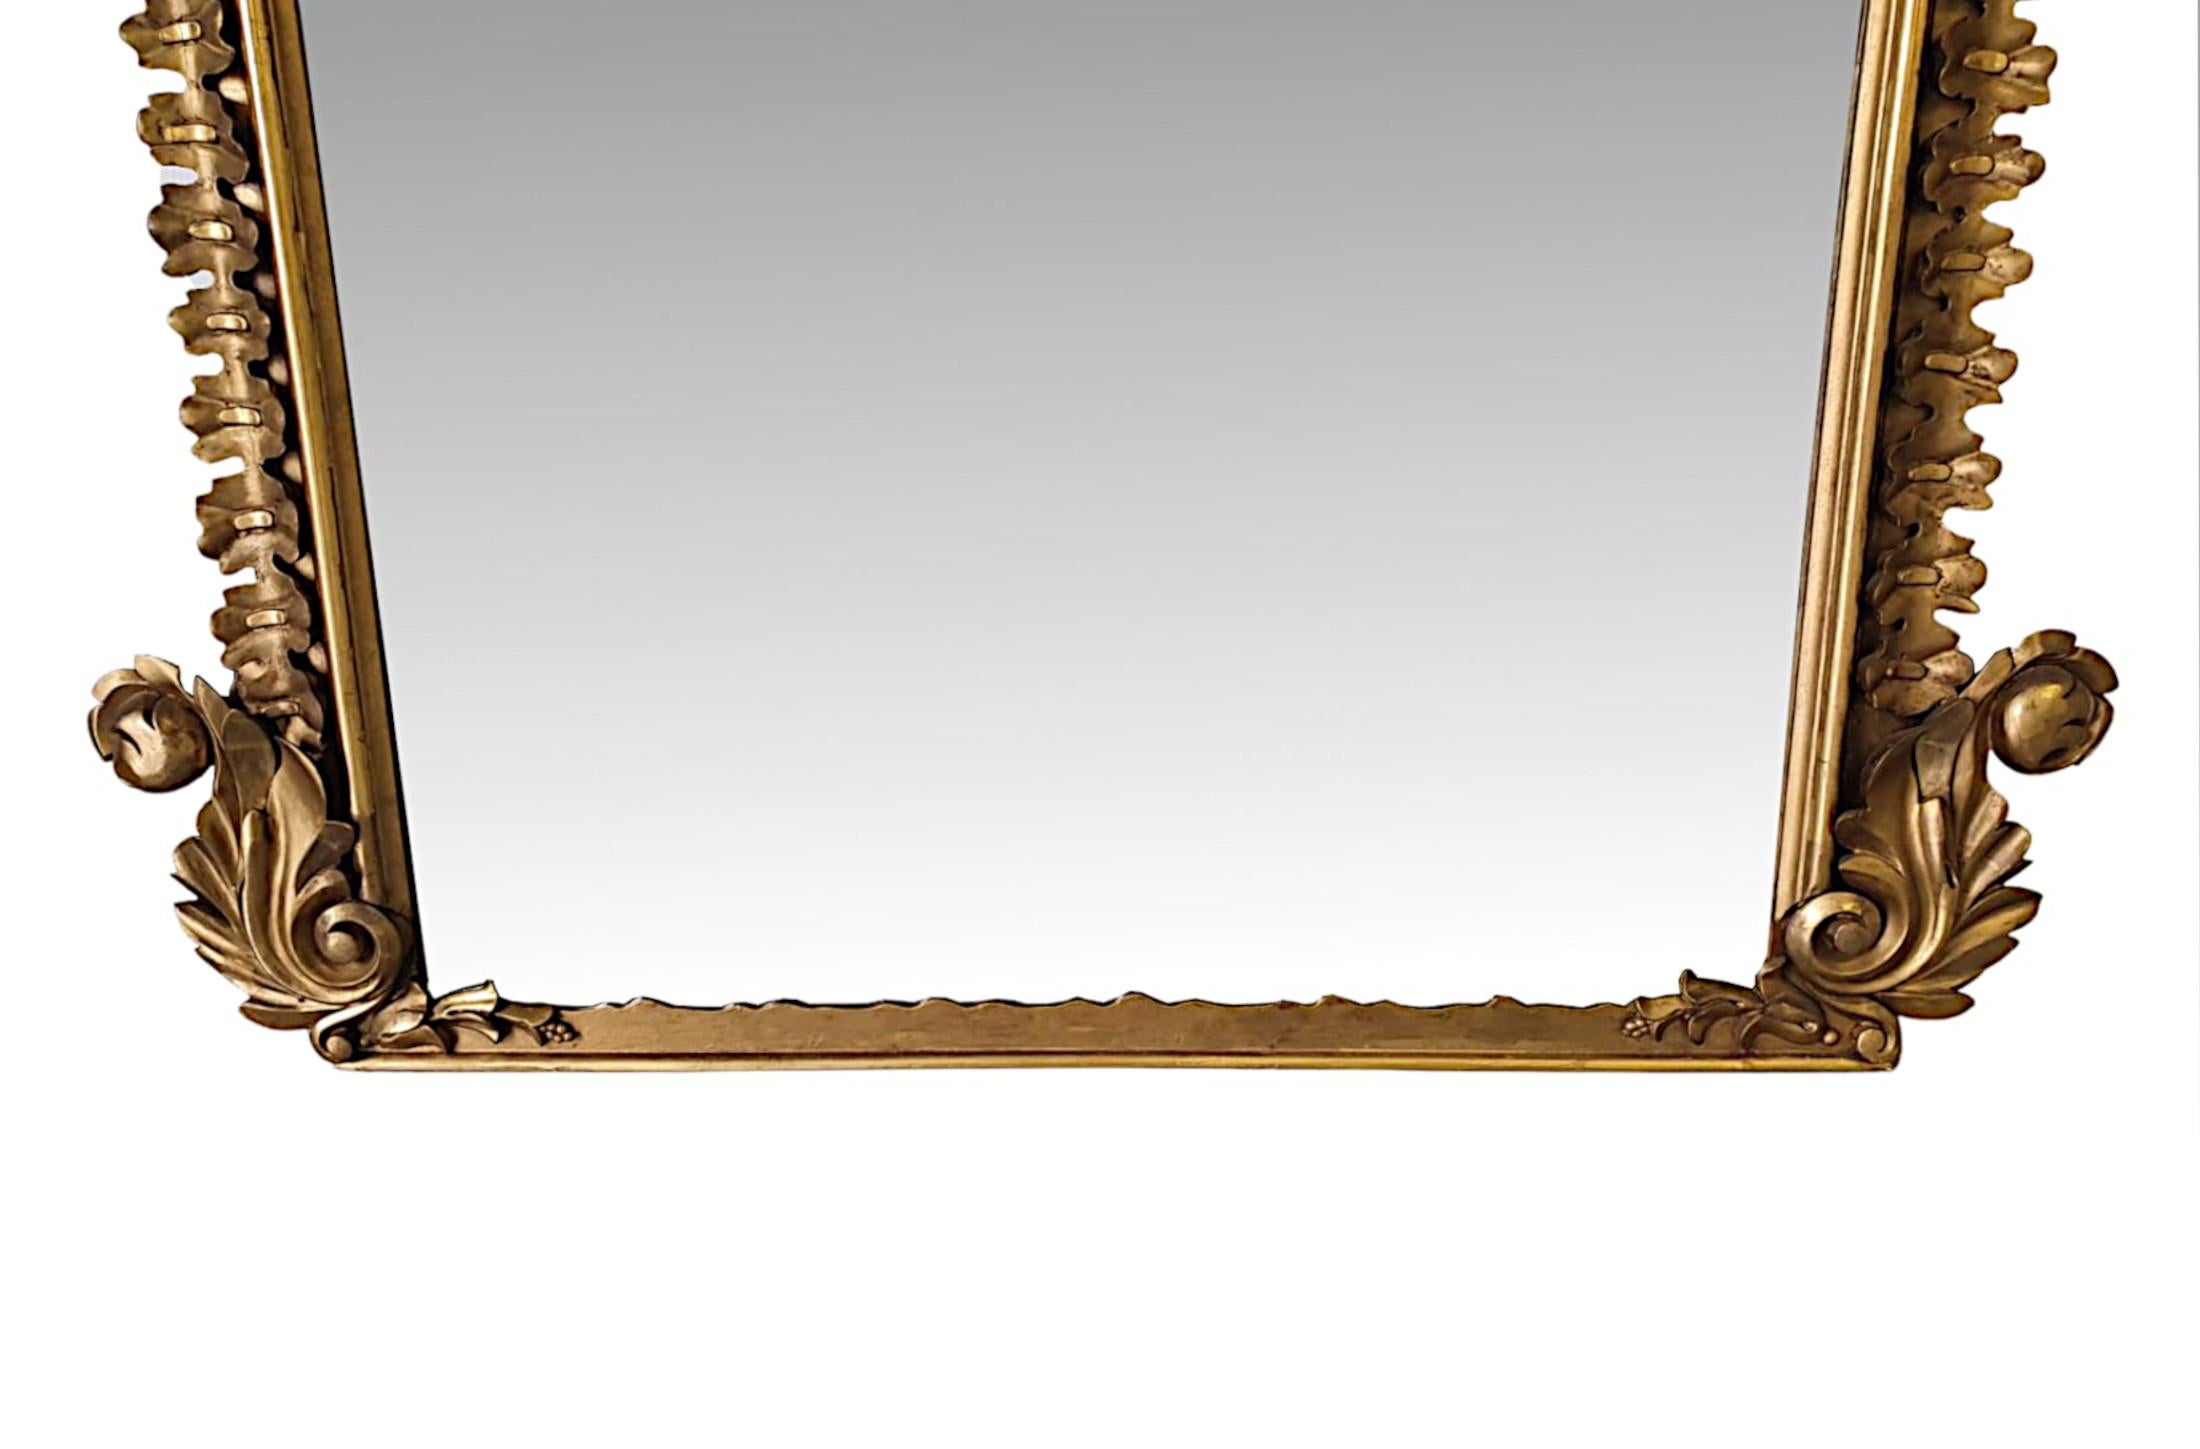 Very Fine Early 19th Century Irish William IV Giltwood Overmantle Mirror For Sale 1